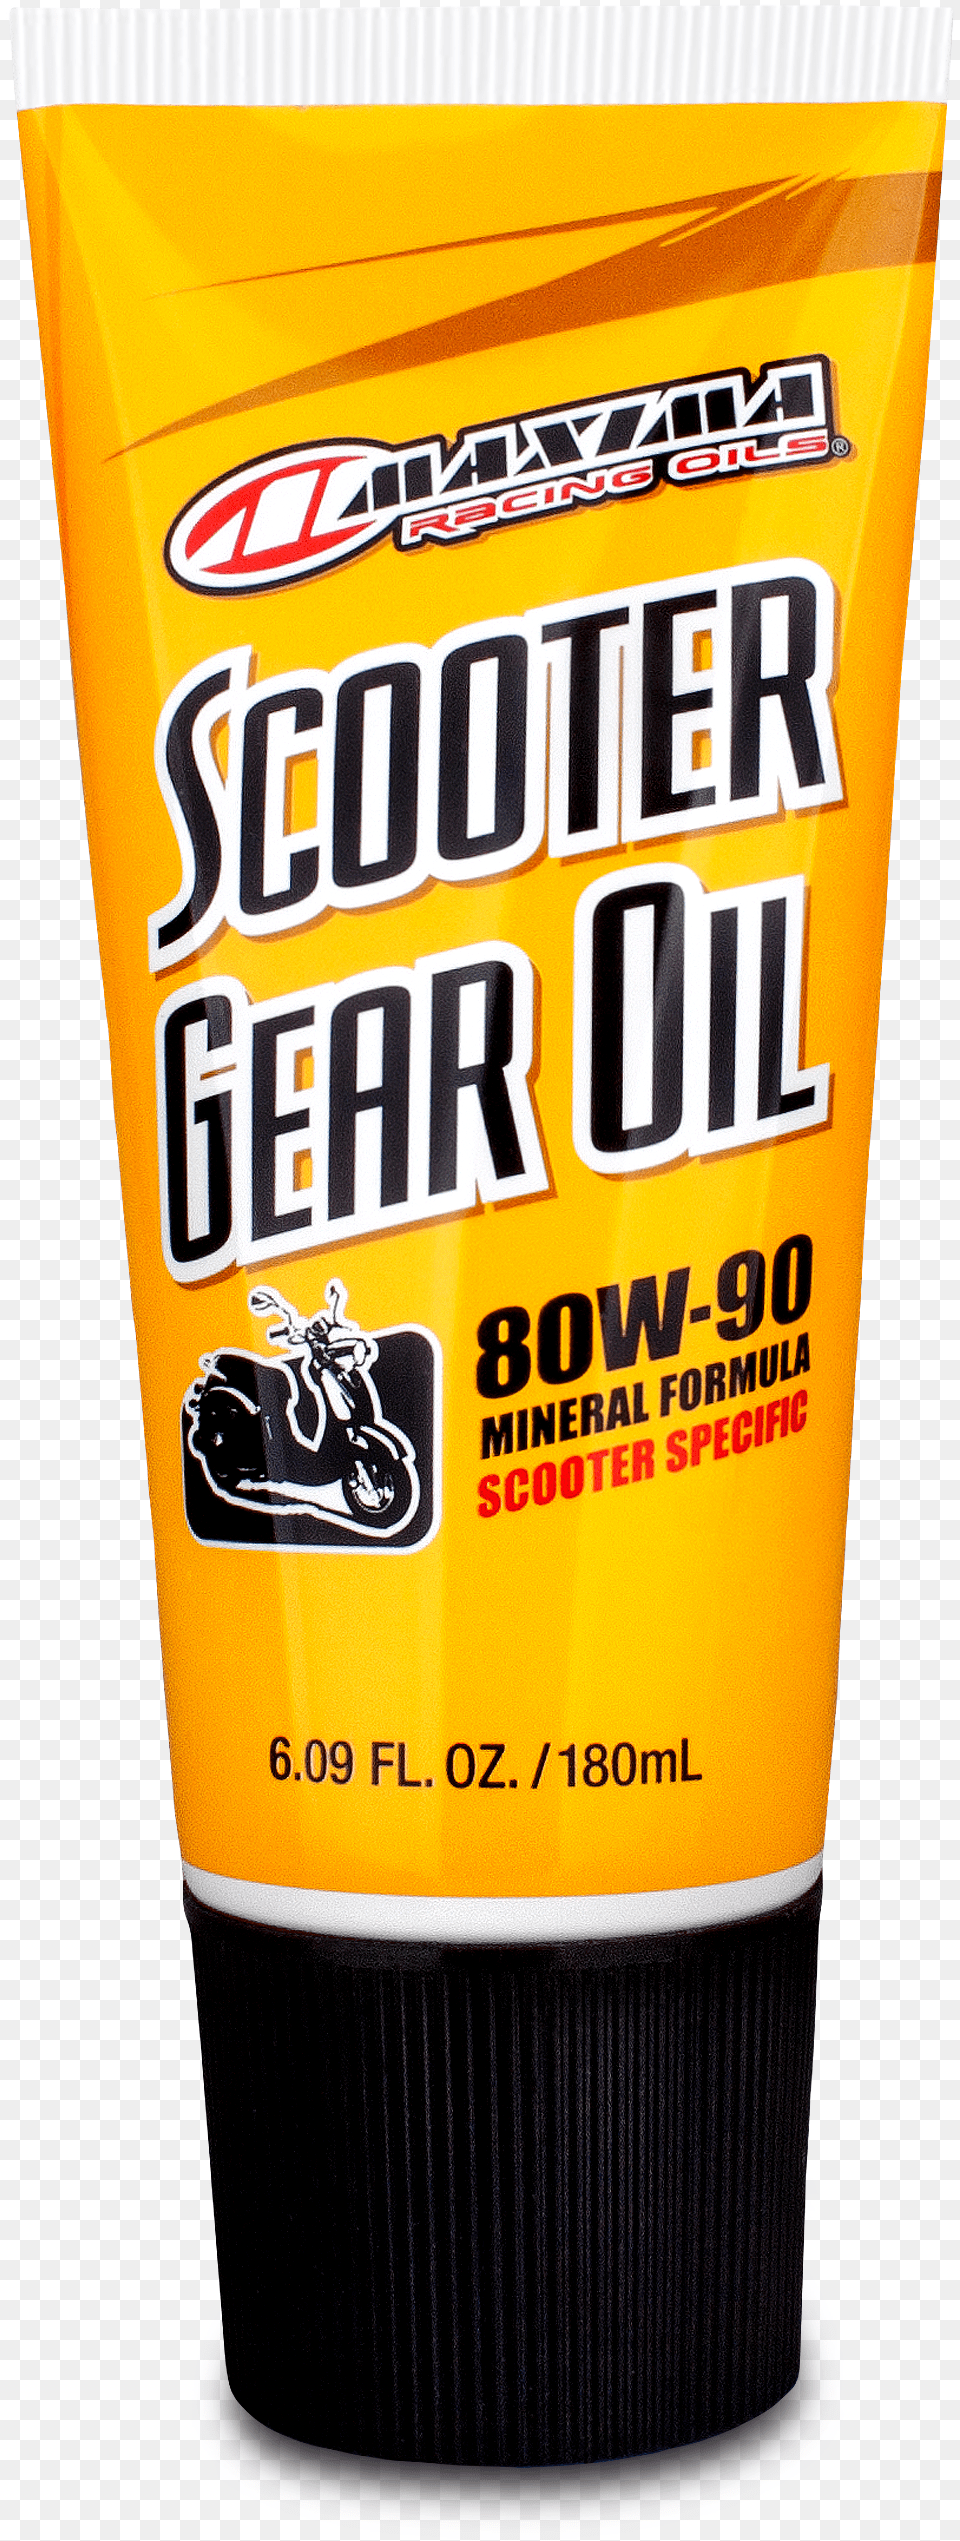 Scooter Gear Oil Cosmetics, Bottle, Alcohol, Beer, Beverage Free Transparent Png